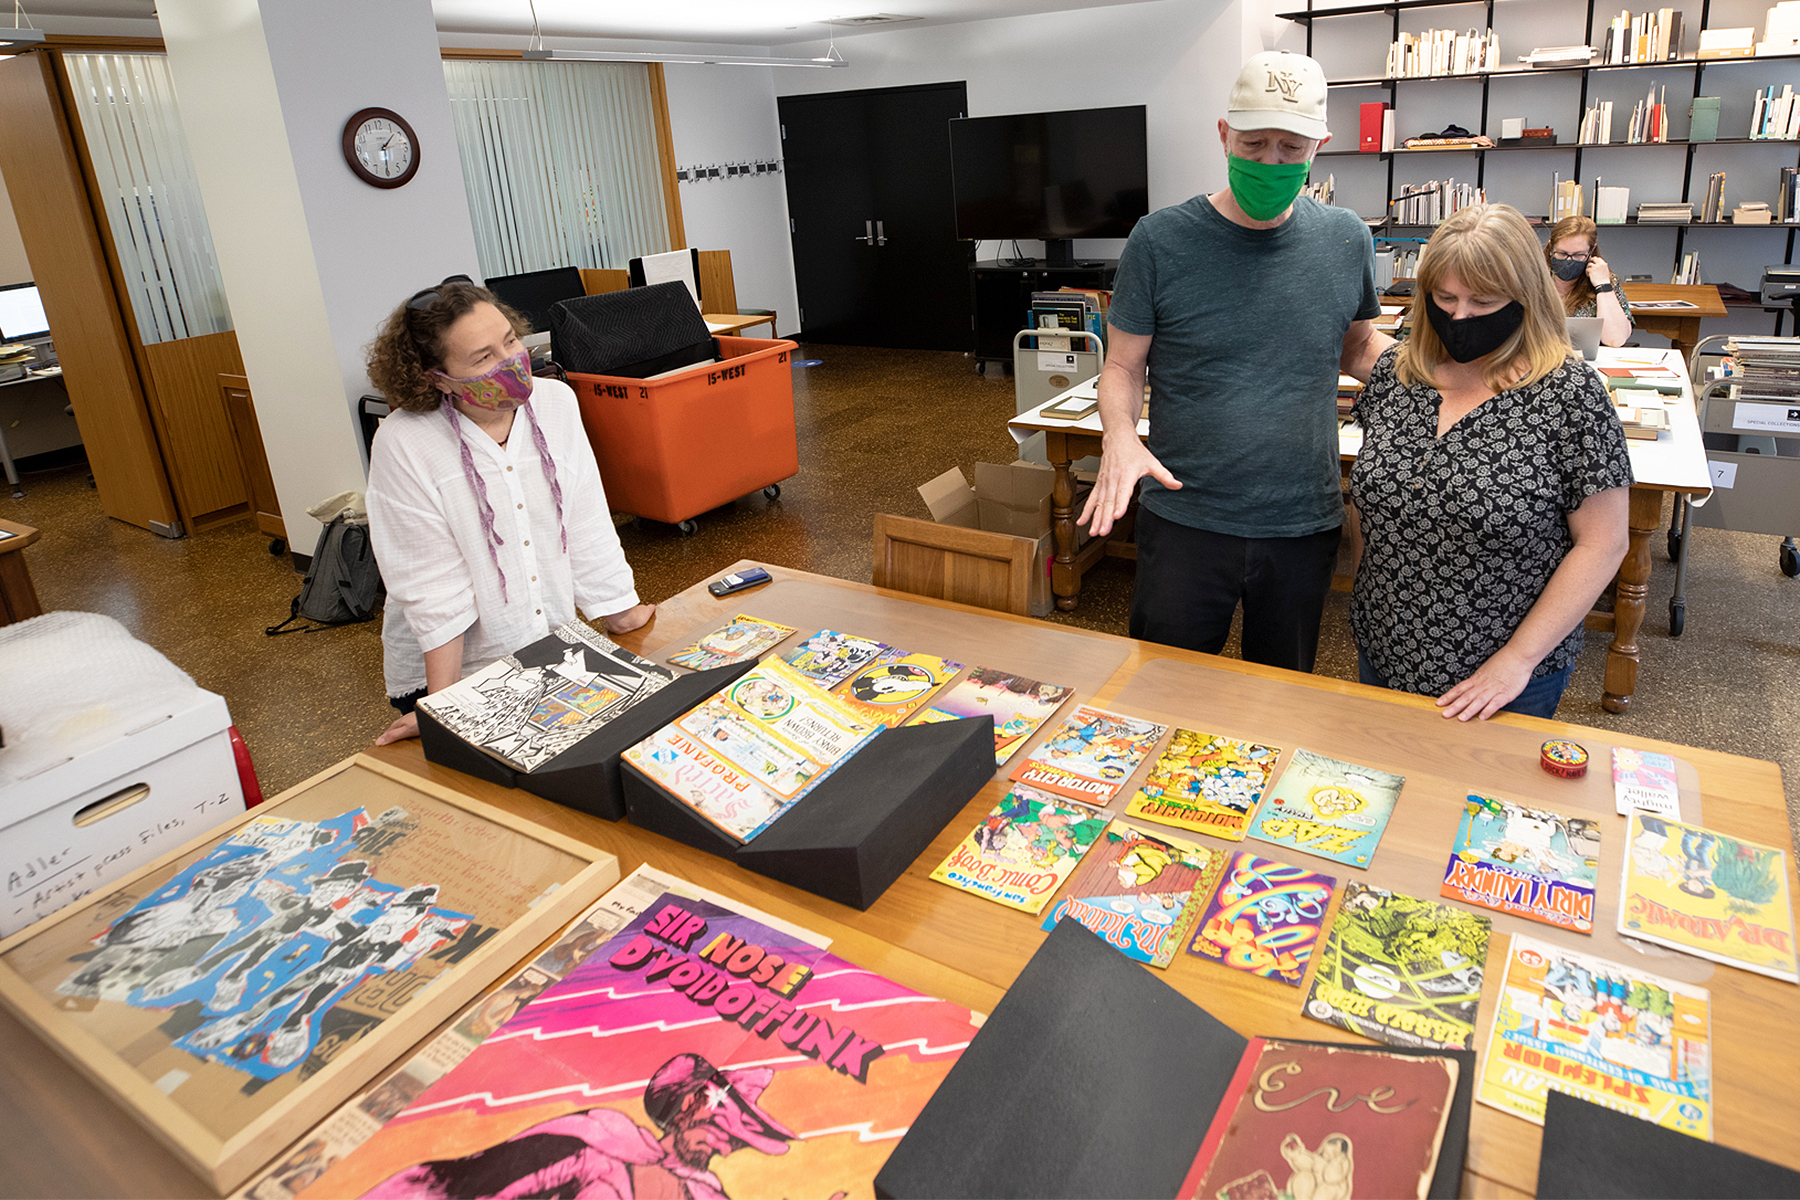 Adler and RISD librarians peruse a table full of underground comix